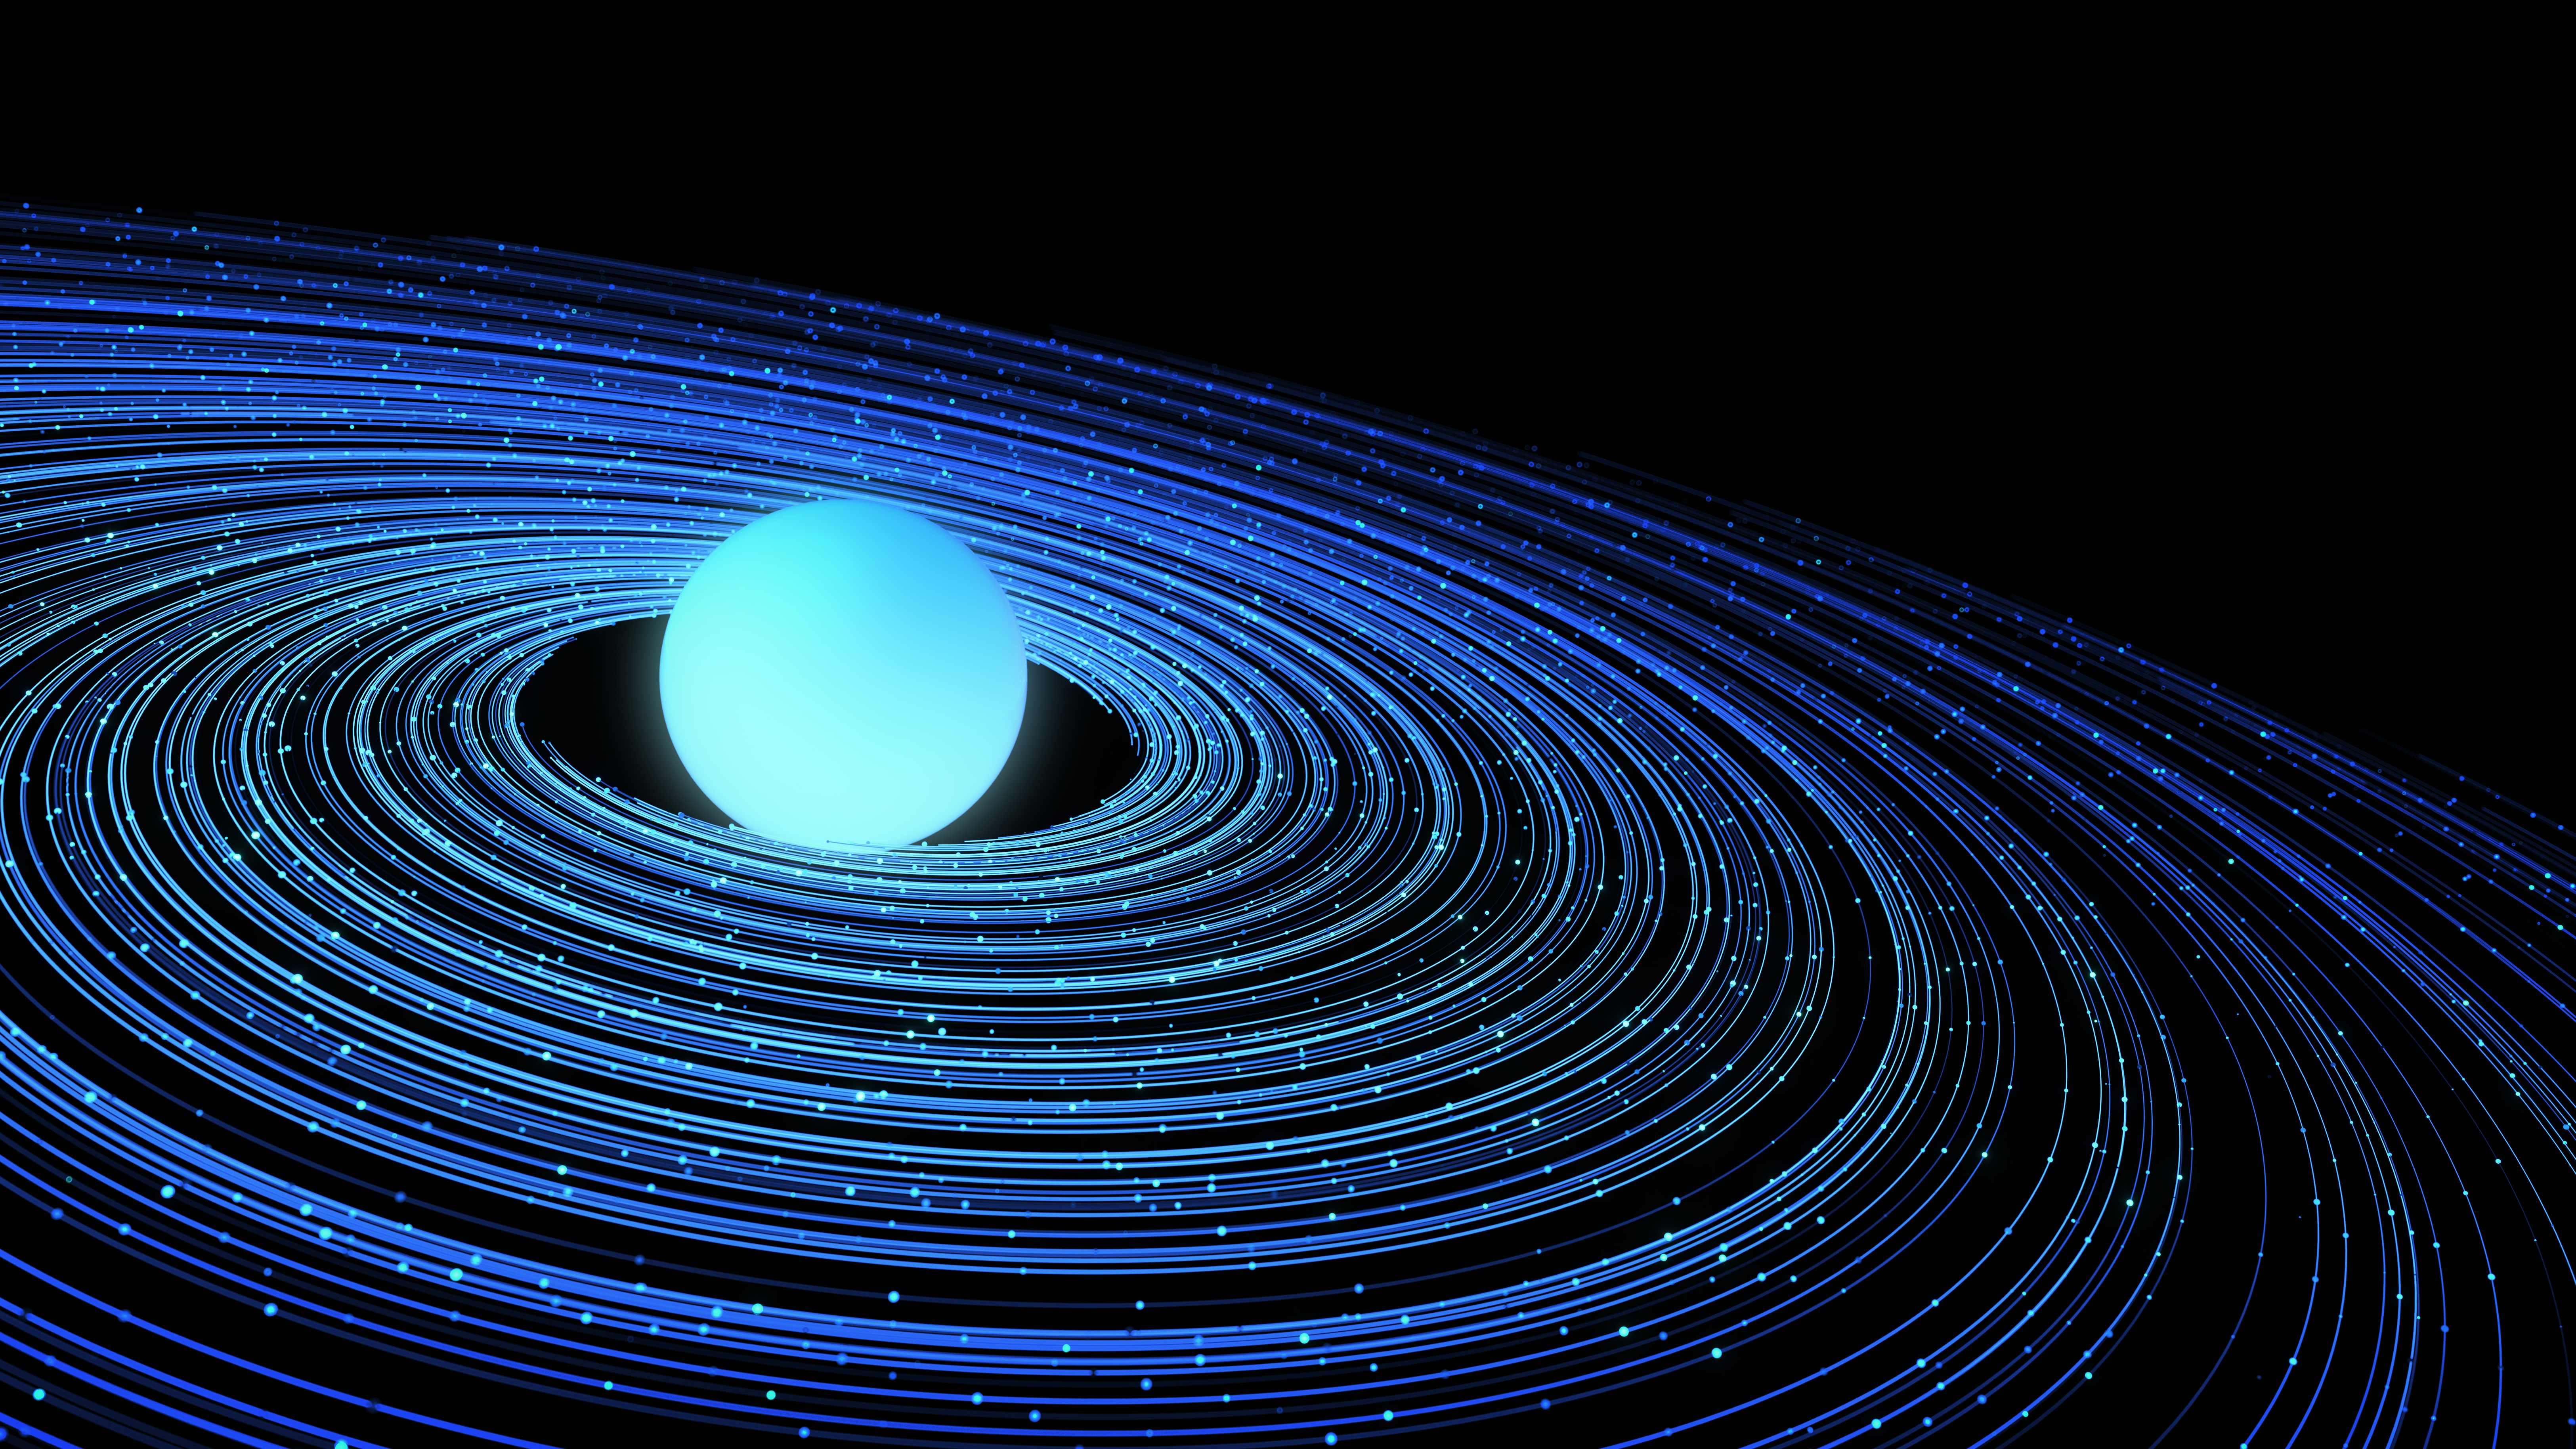 Glowing neon blue ball surrounded by rings similar to Saturn